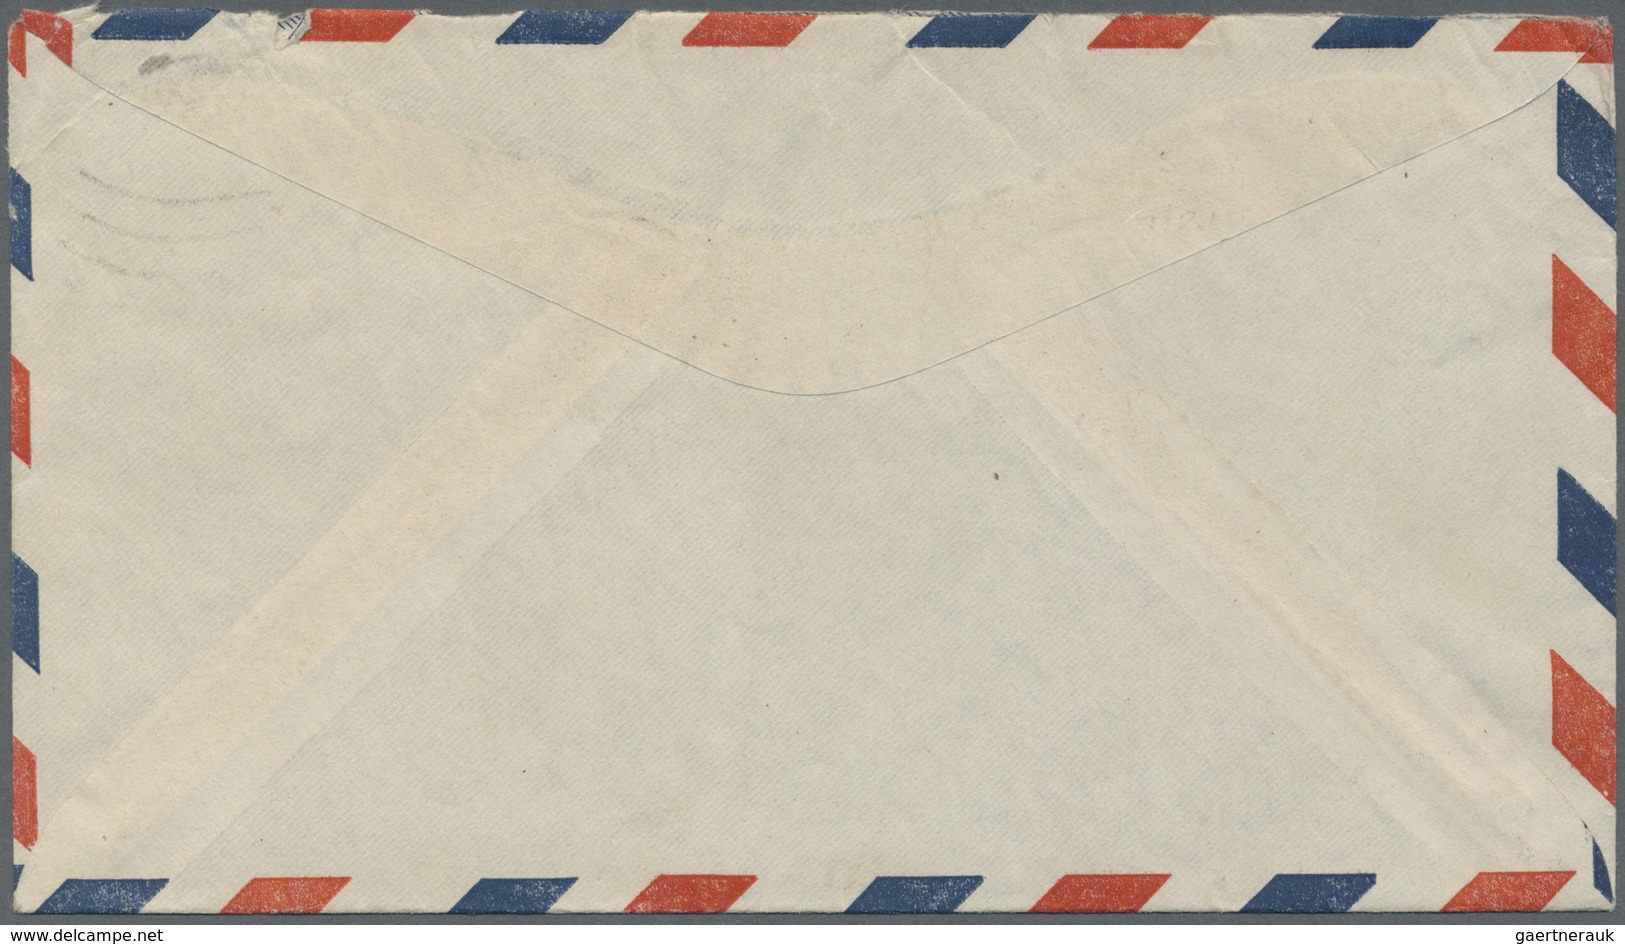 Br Kuwait: 1947. Air Mail Envelope Addressed To The United States Bearing SG 52, 3p Slate (pair), SG 57 - Kuwait